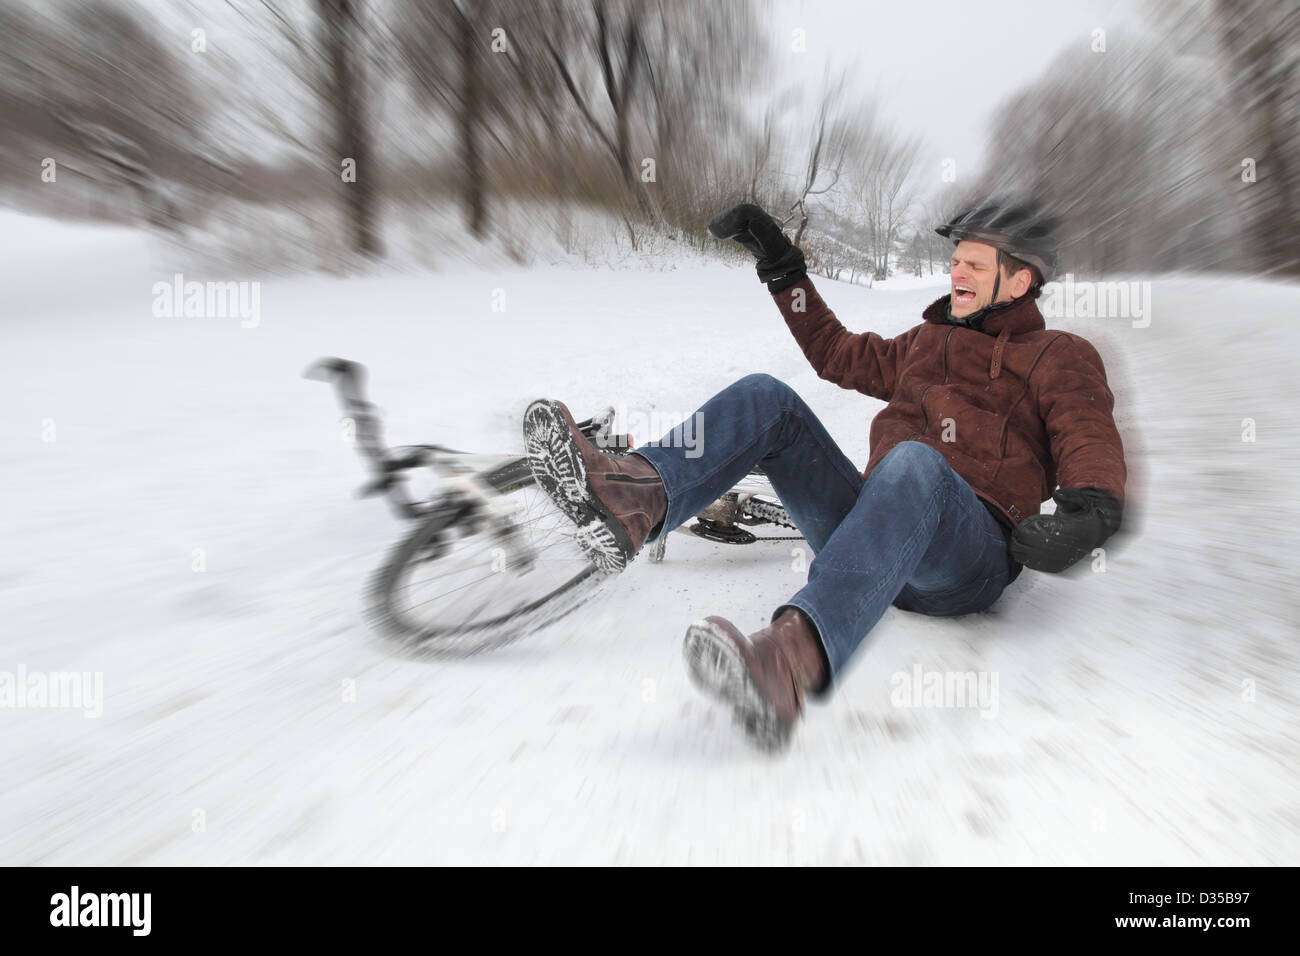 Bicycle accident on a snowy street with a falling man Stock Photo